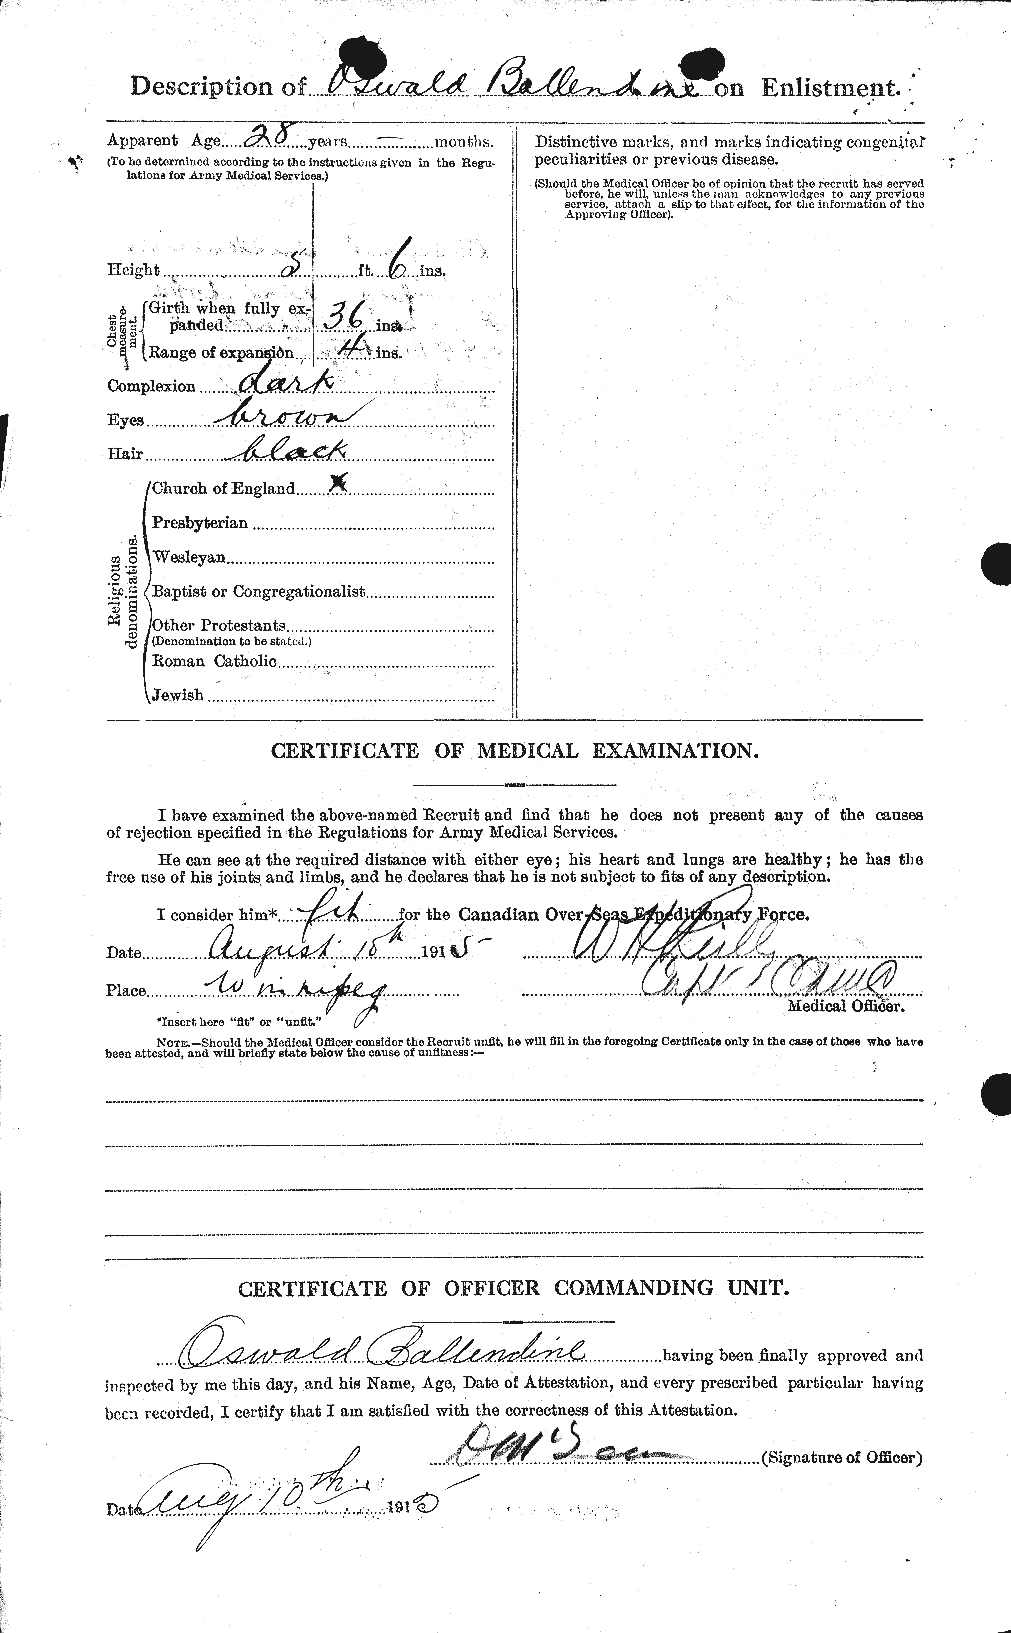 Personnel Records of the First World War - CEF 219681b